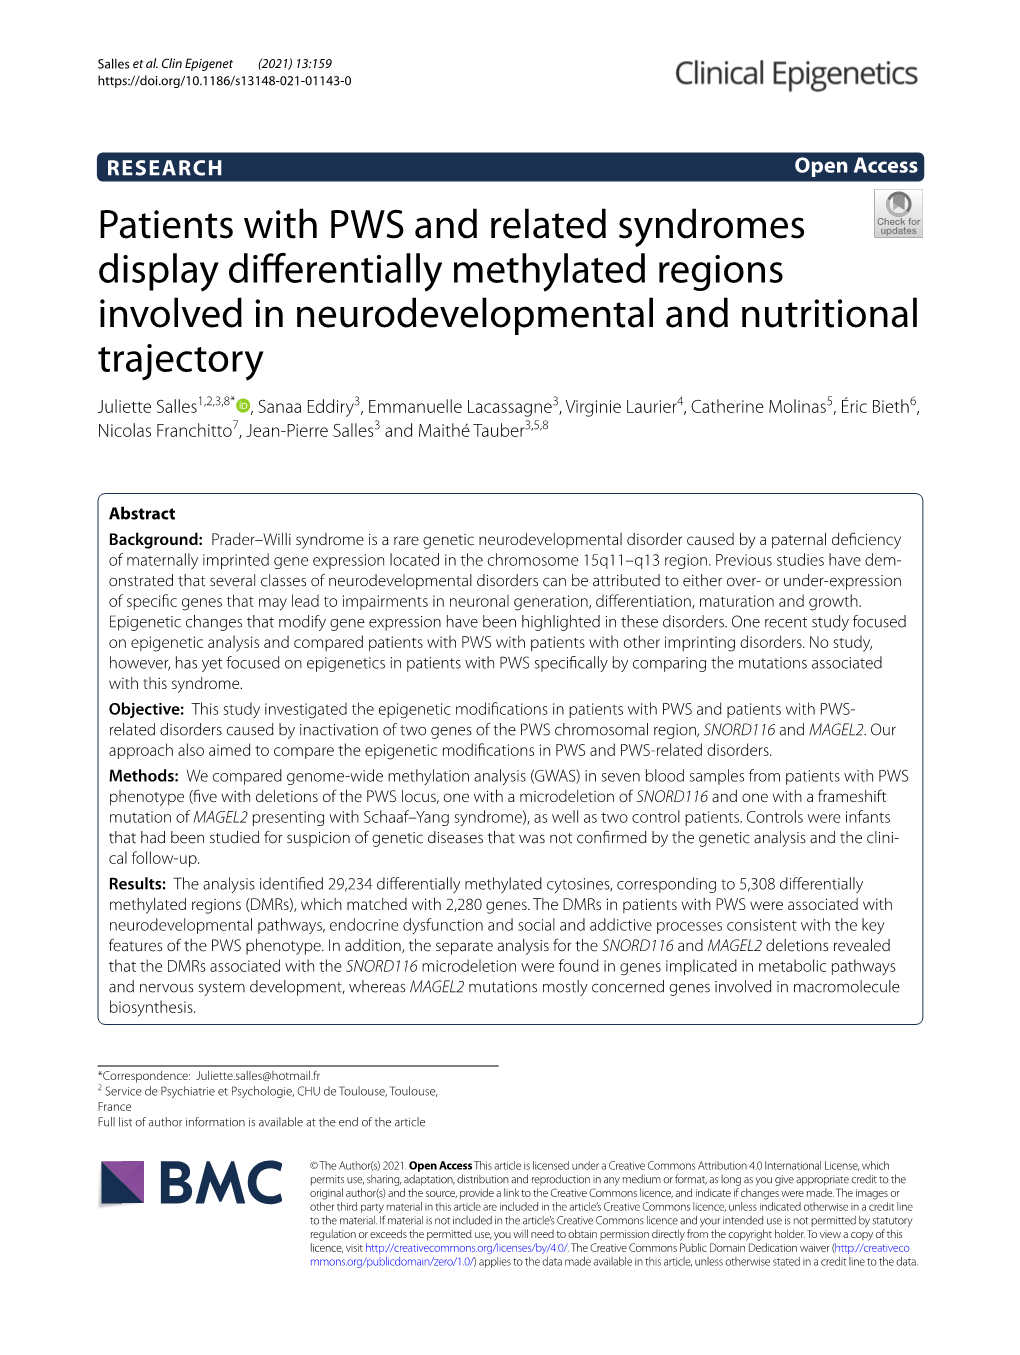 Patients with PWS and Related Syndromes Display Differentially